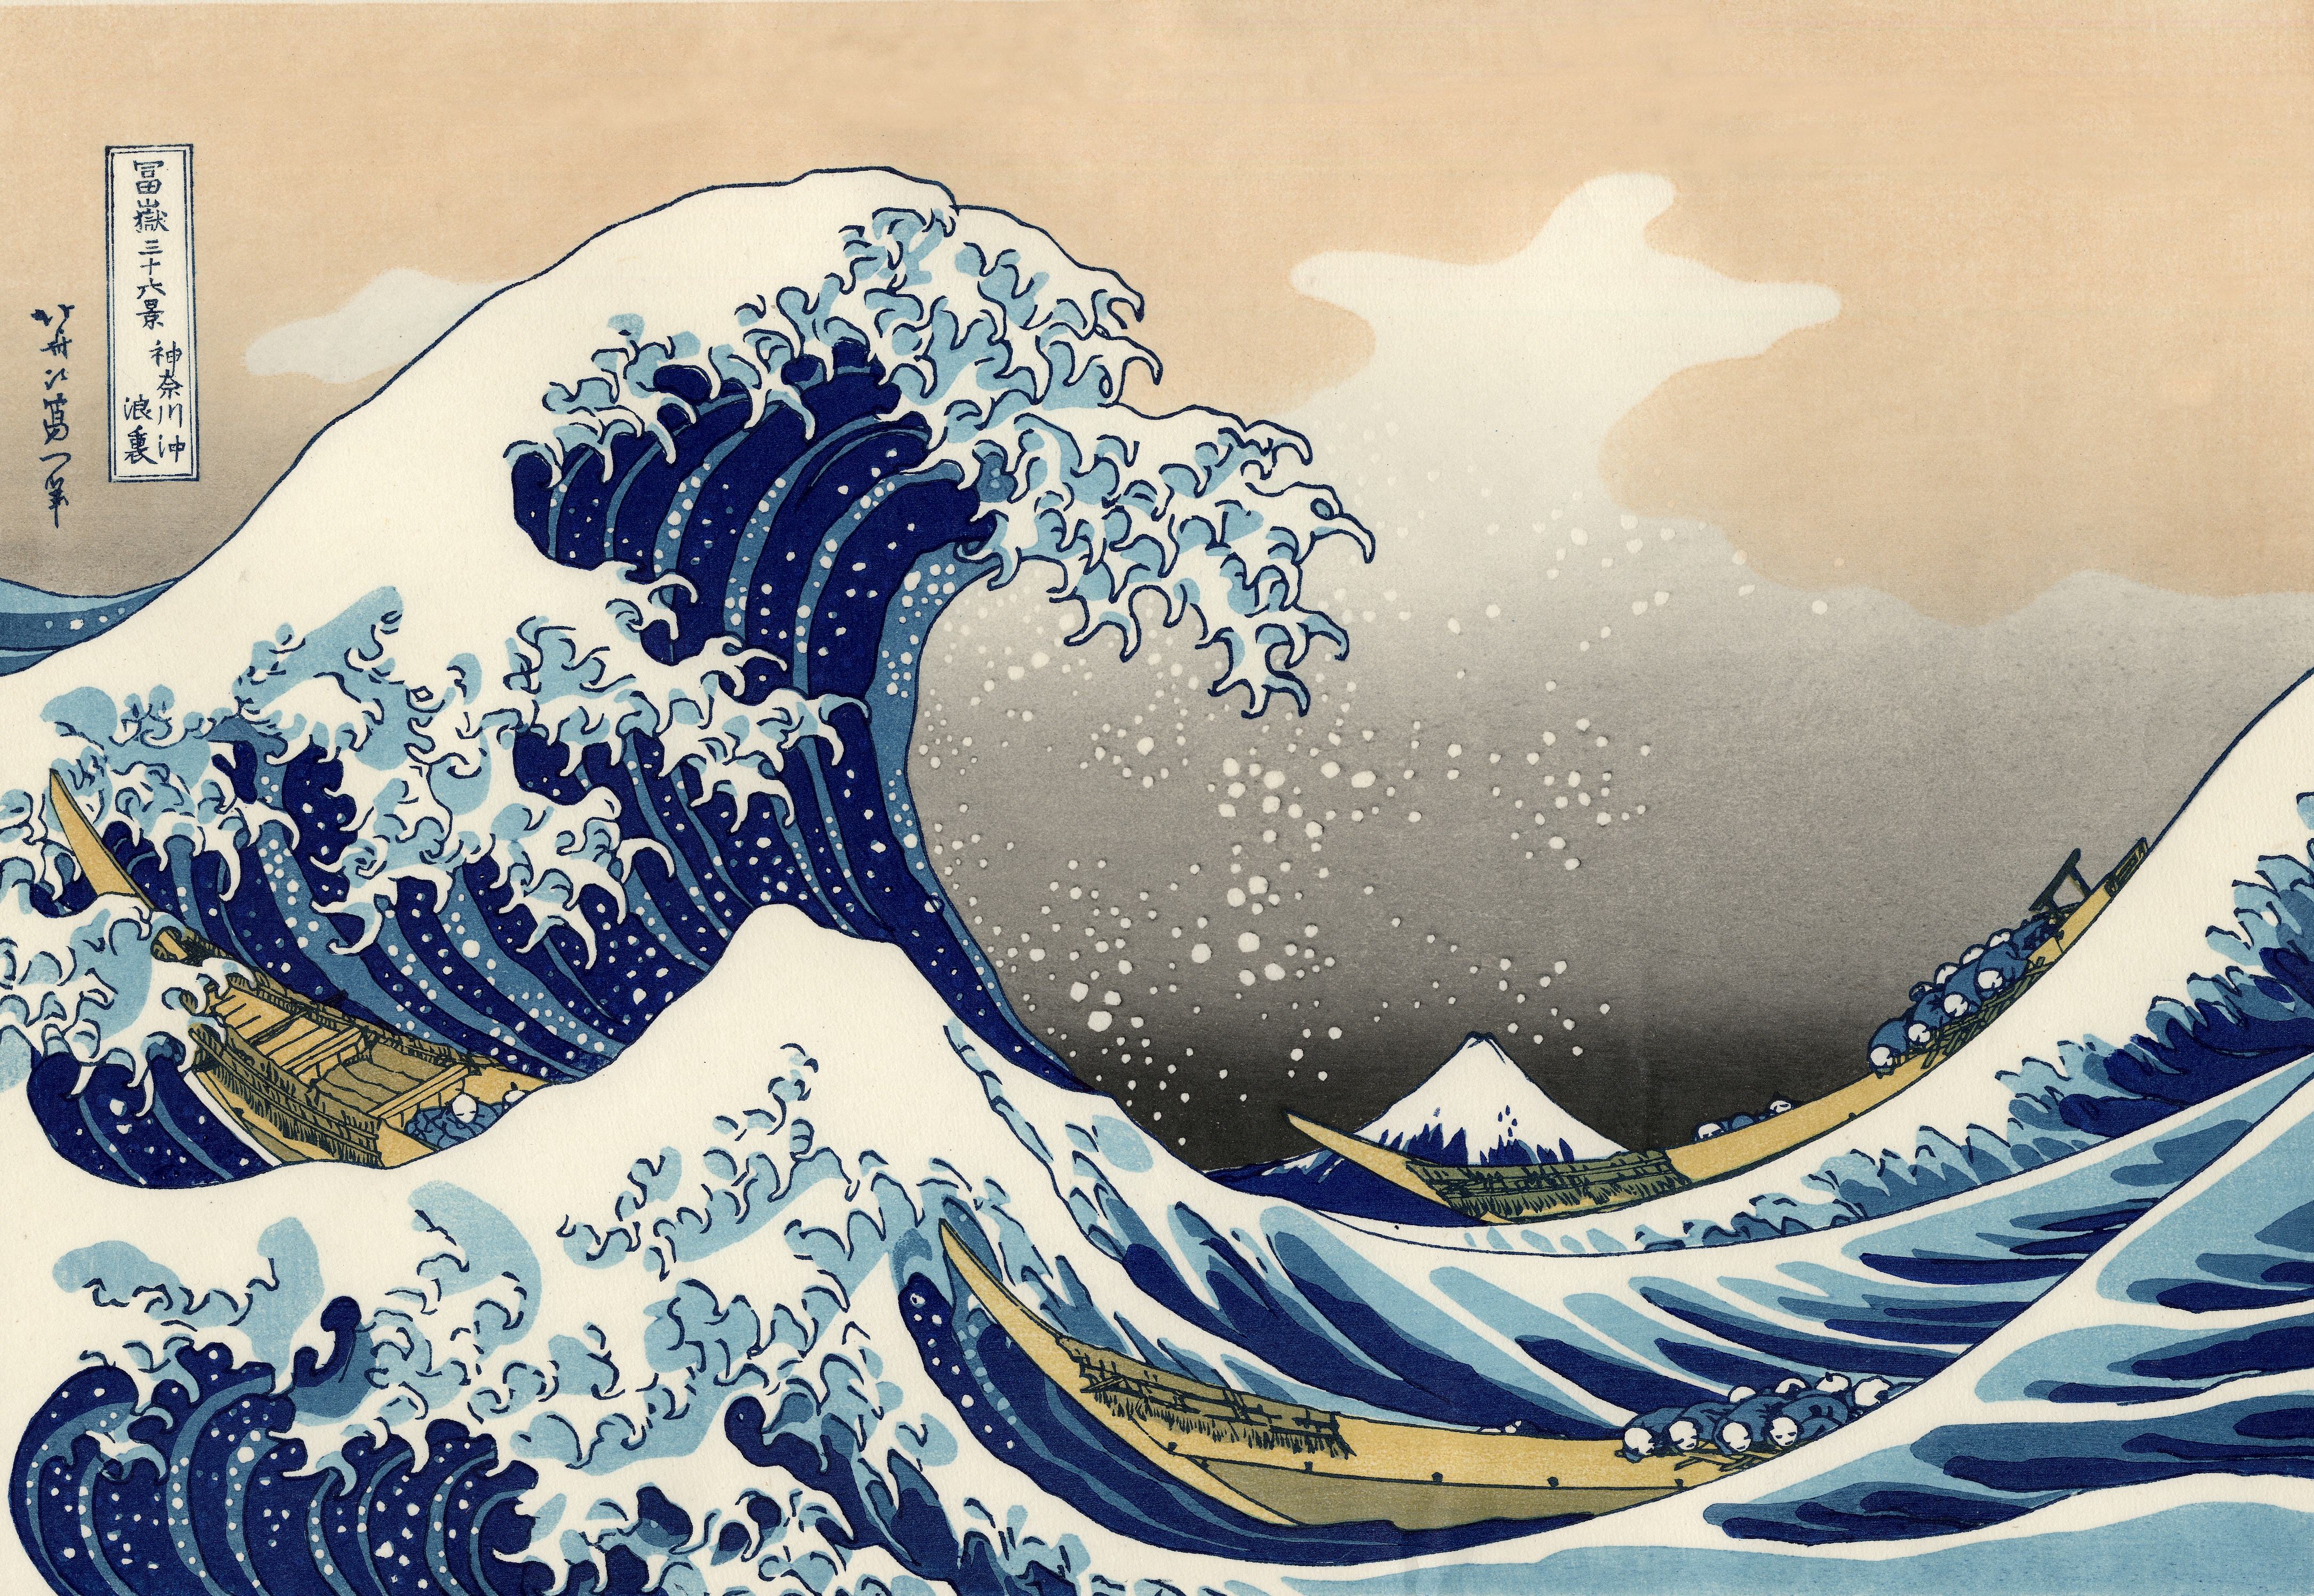 wave, the great wave off kanagawa, artistic High Definition image